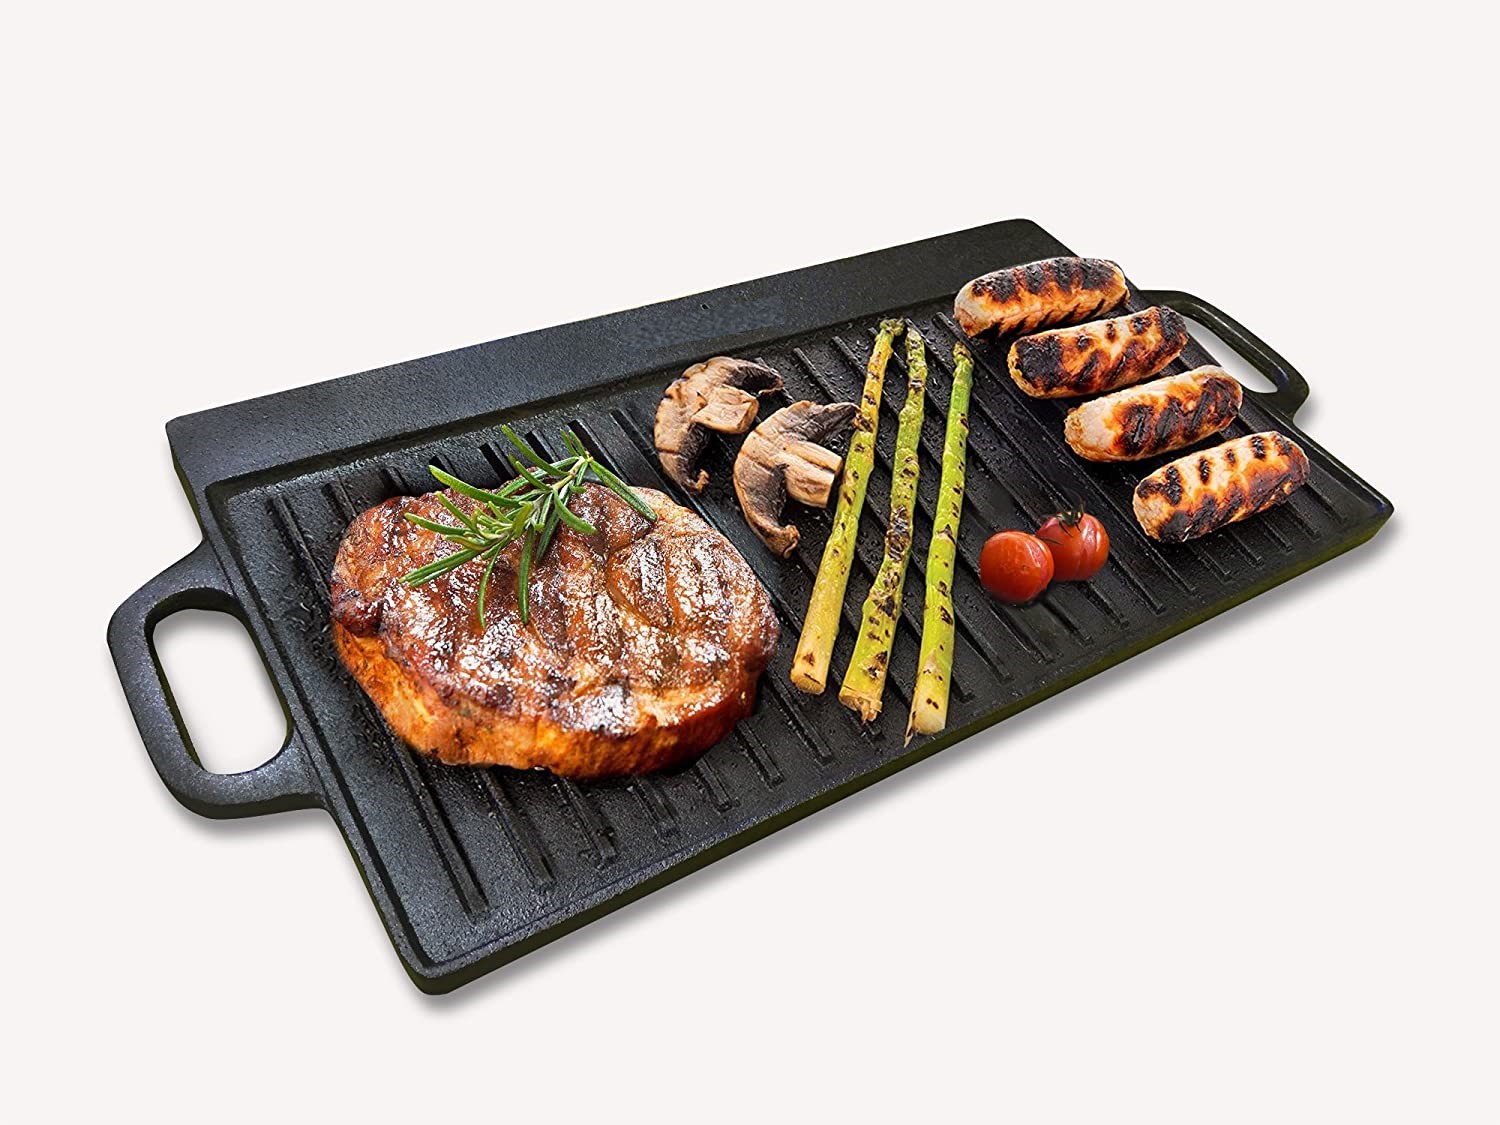 This is a picture of a cast iron hotplate ribbed side cooking steak and sausages